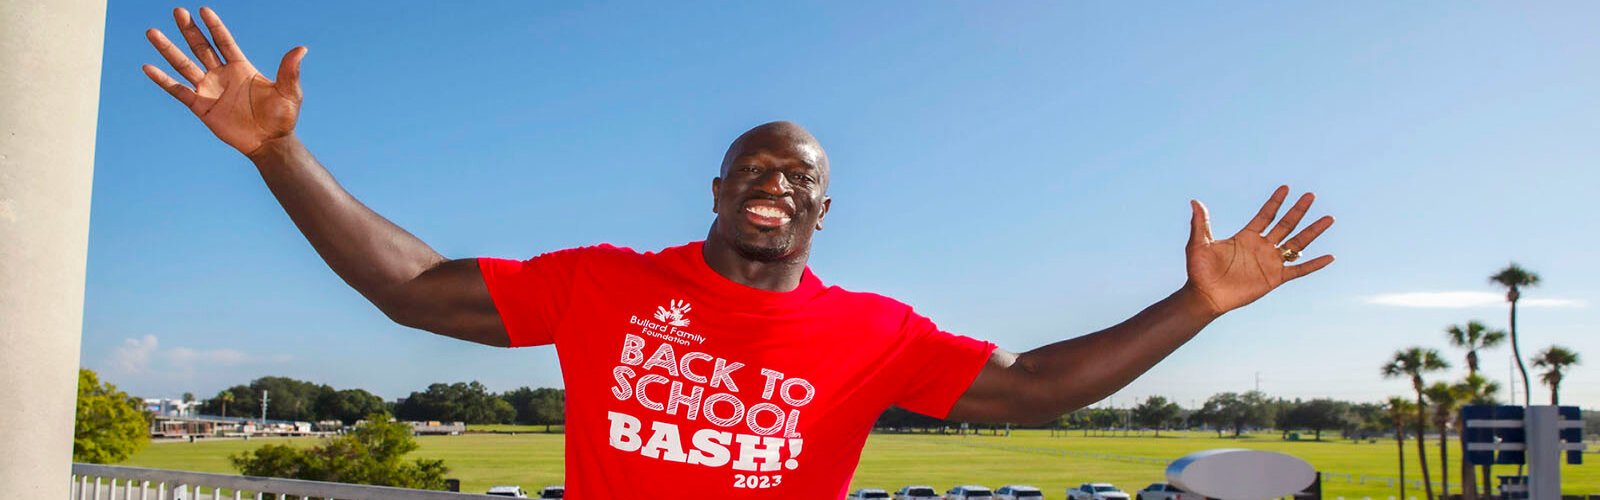 WWE Superstar Titus O'Neil/Thaddeus Bullard's Bullard Family Foundation Back to School Bash provided thousands of families with backpacks filled with school supplies, medical and dental services, haircuts and connections to nonprofit services.